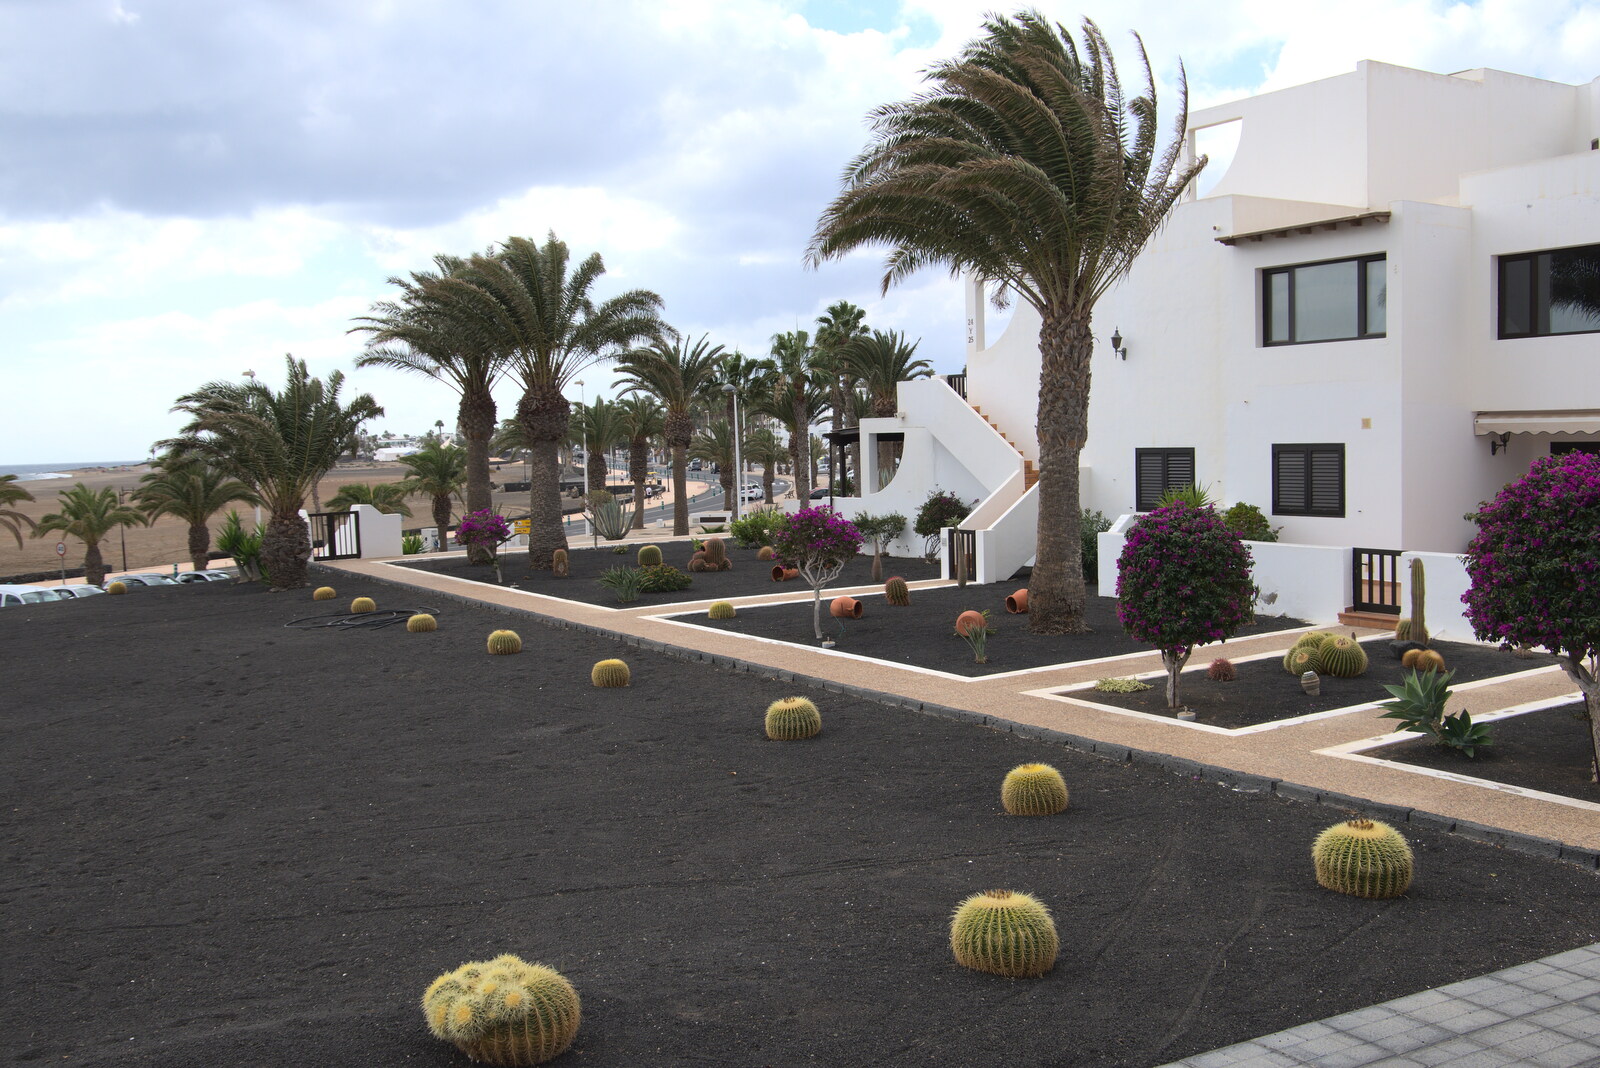 Cool football-like cacti from Five Days in Lanzarote, Canary Islands, Spain - 24th October 2021